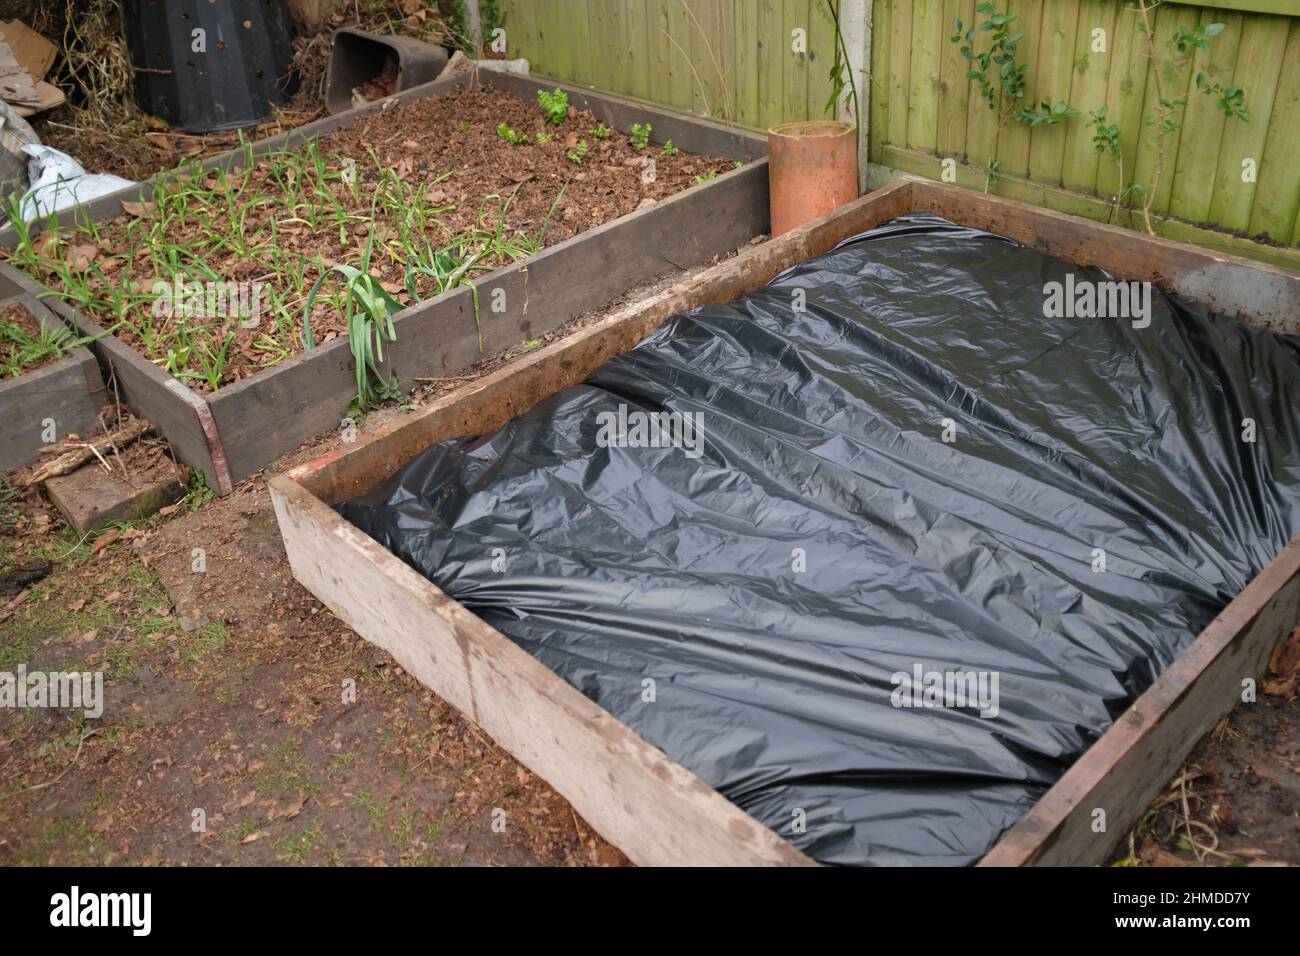 A raised bed in a garden covered with plastic sheeting Stock Photo